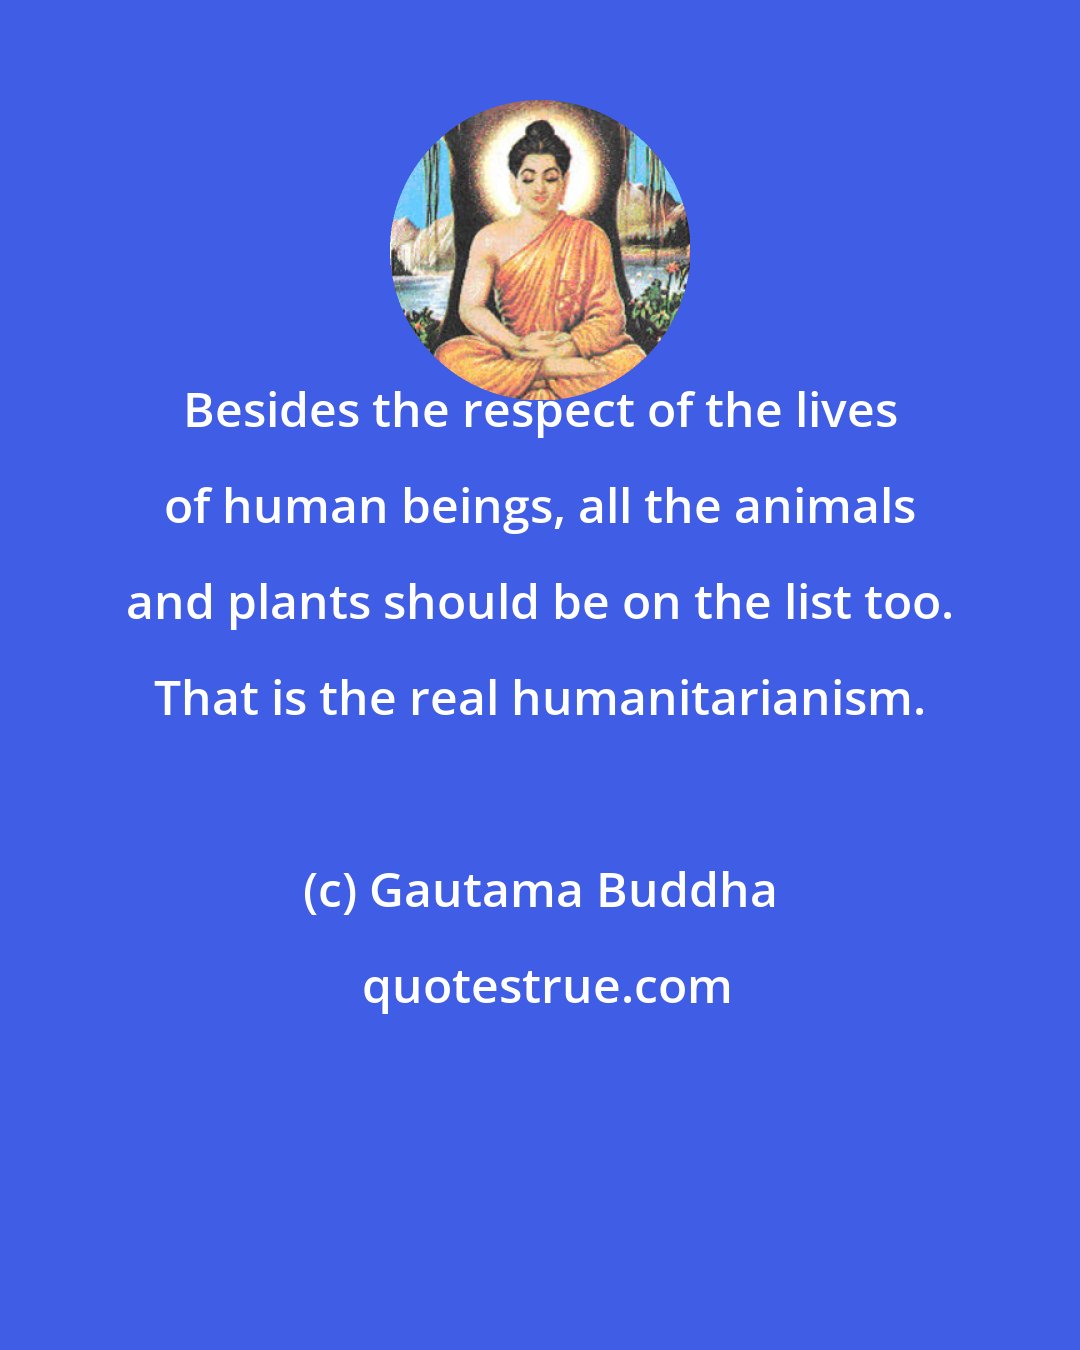 Gautama Buddha: Besides the respect of the lives of human beings, all the animals and plants should be on the list too. That is the real humanitarianism.